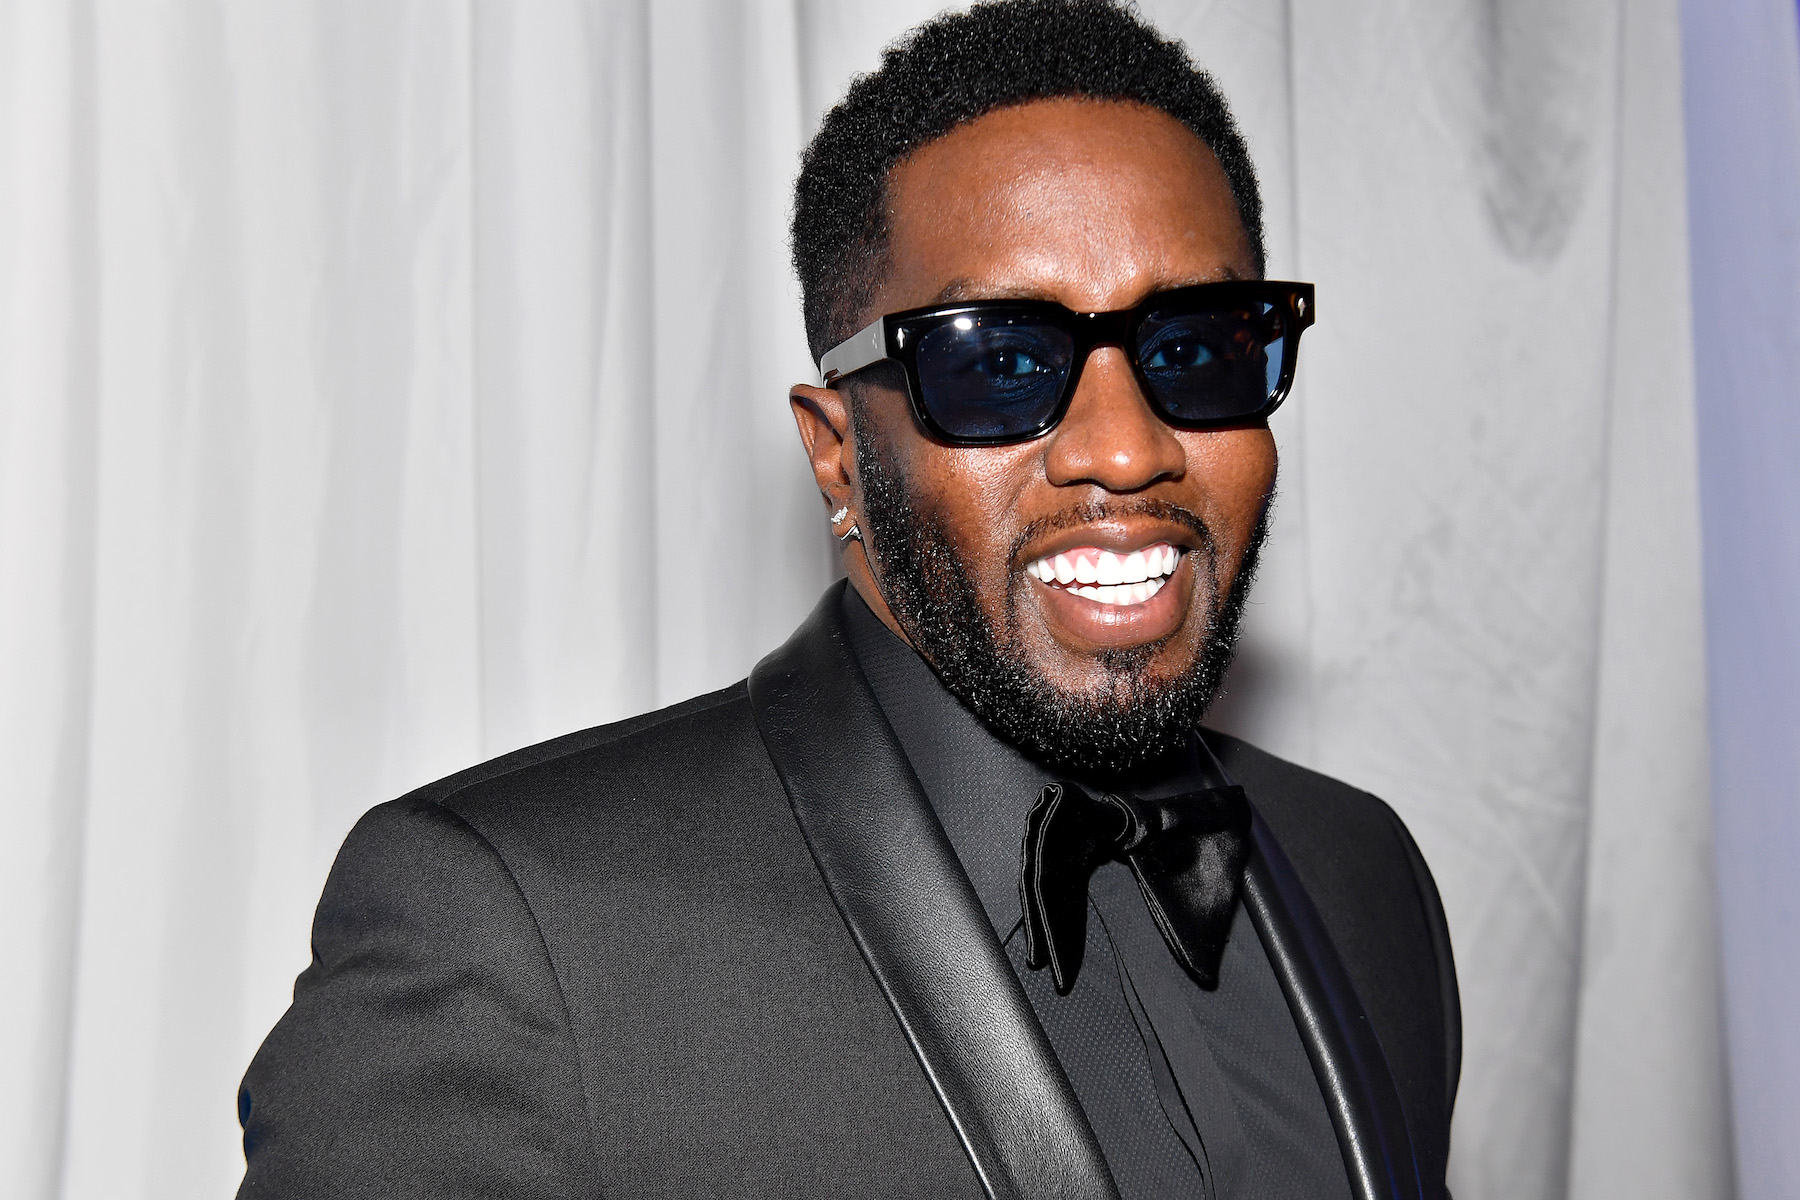 Diddy, who recently called out Apple Music and Spotify, wearing a black suit